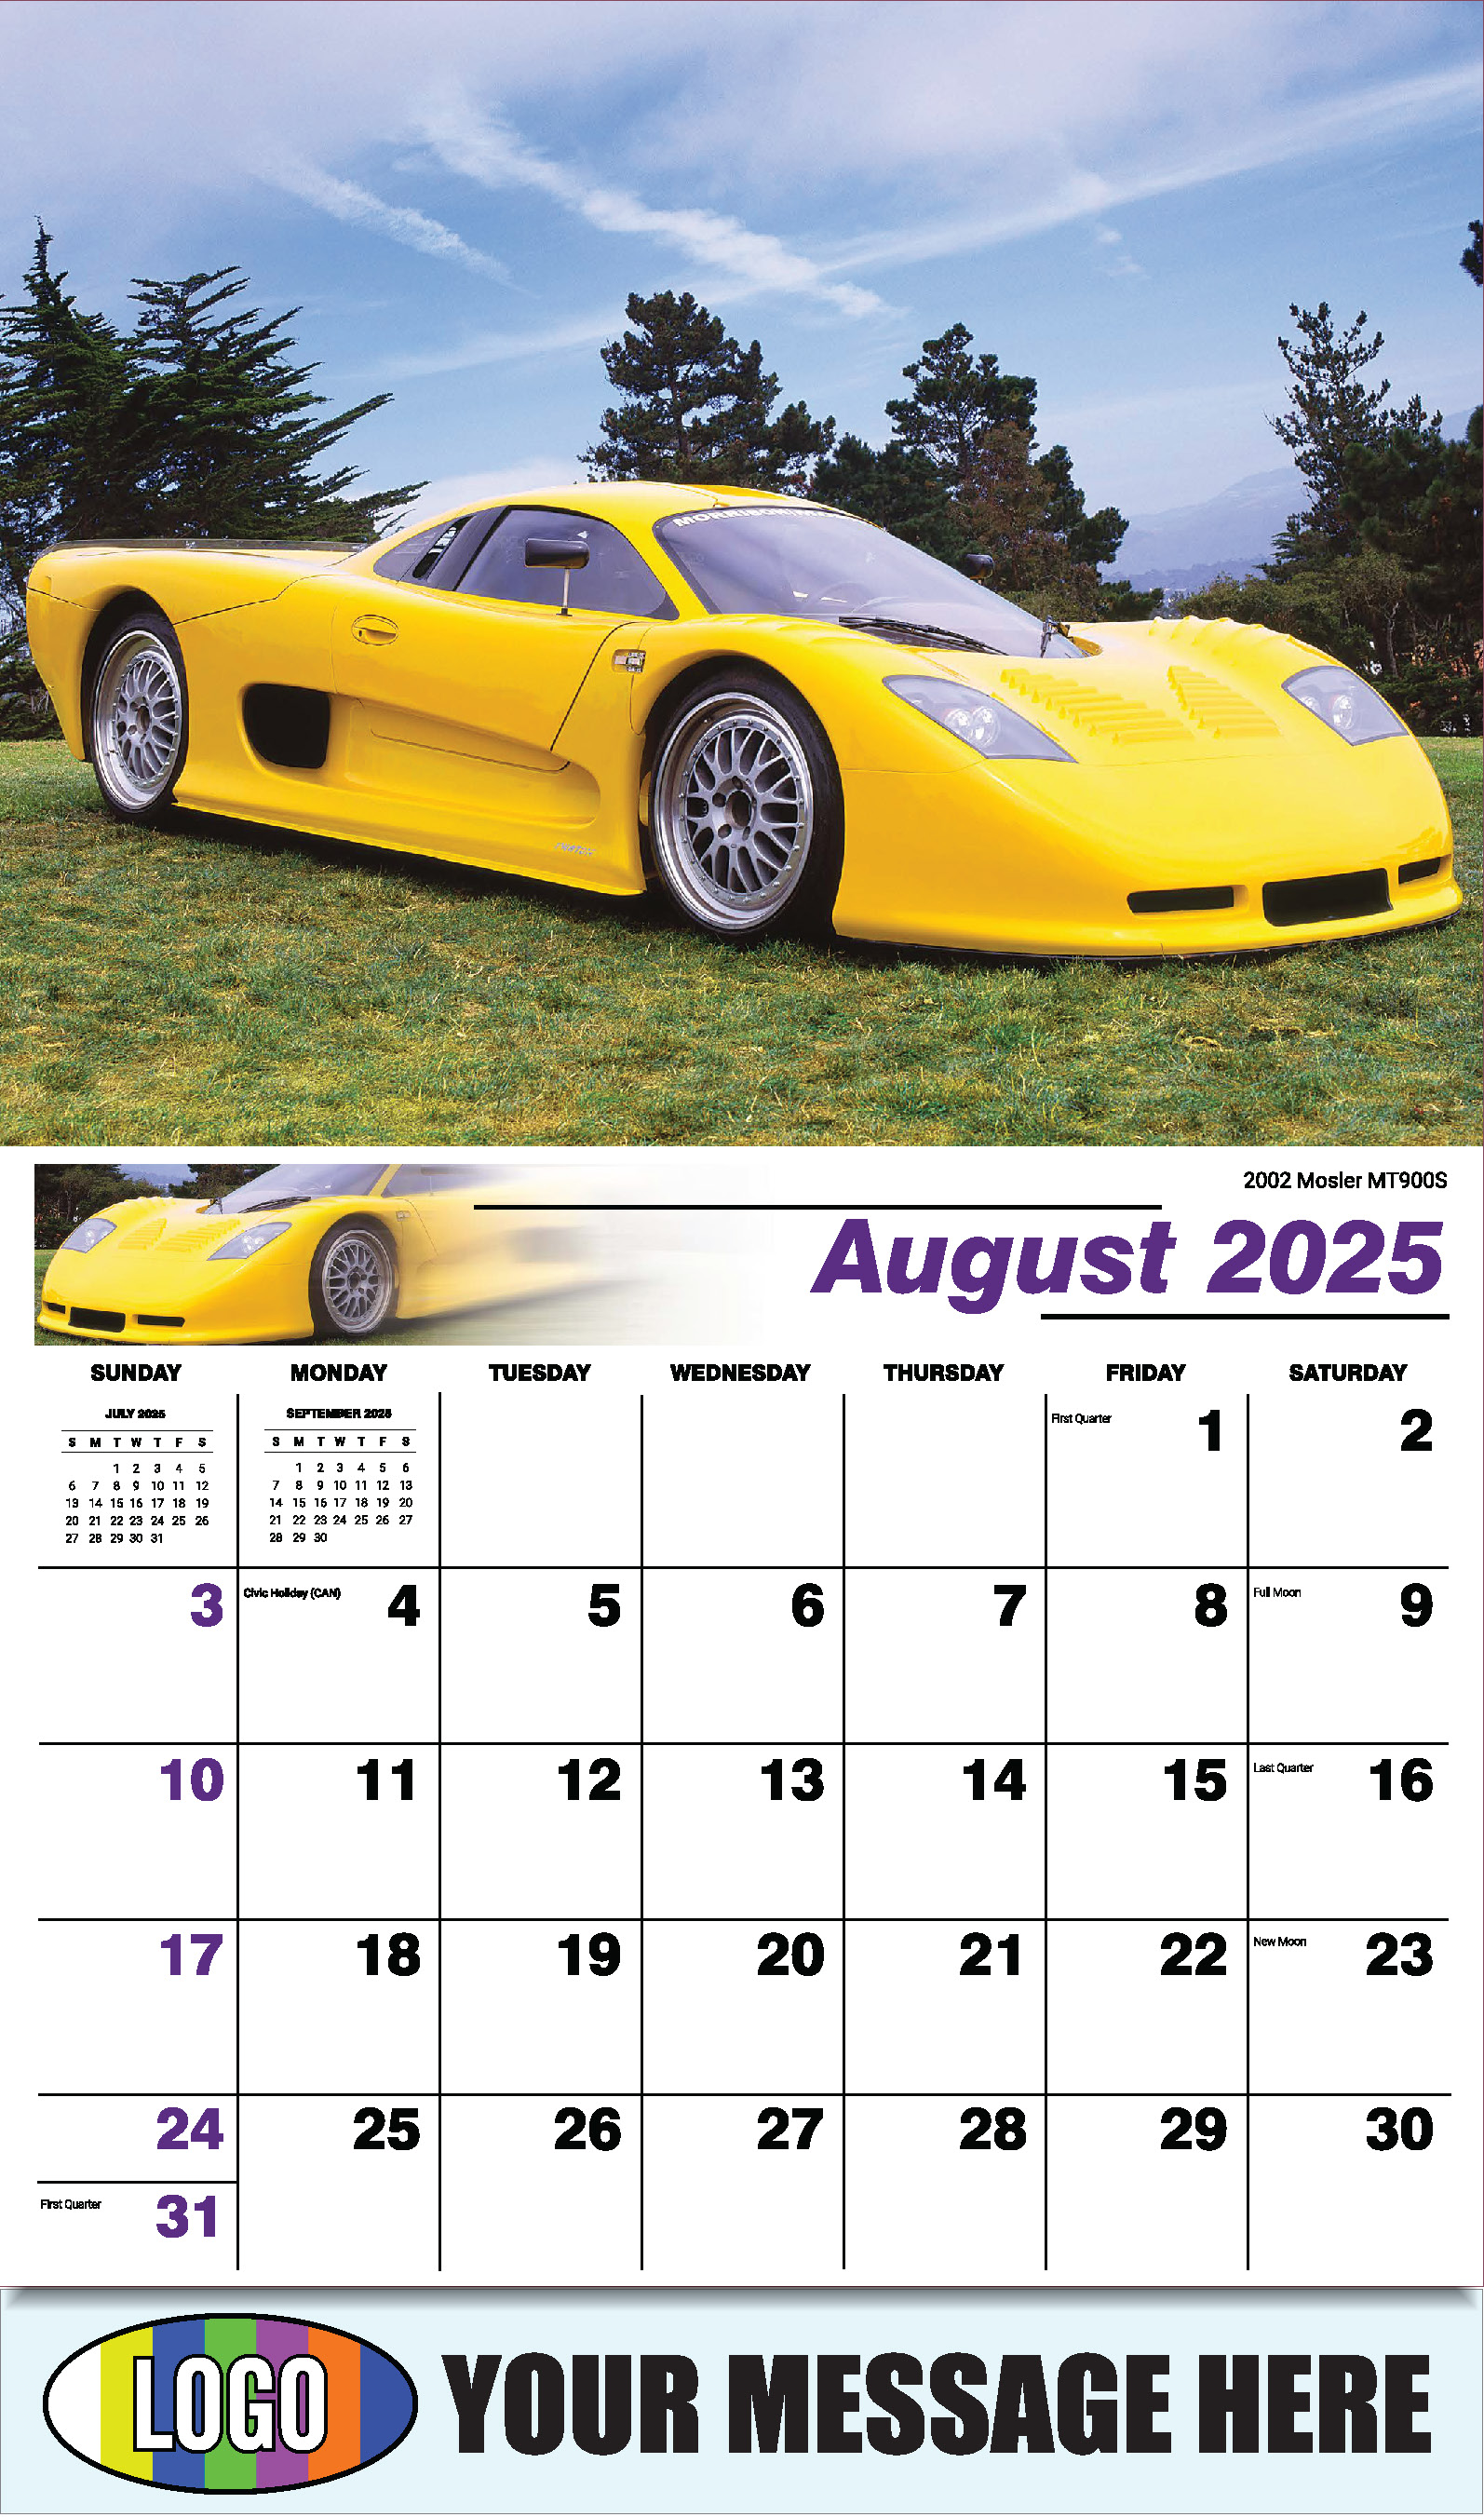 Exotic Cars 2025 Automotive Business Advertising Calendar - August